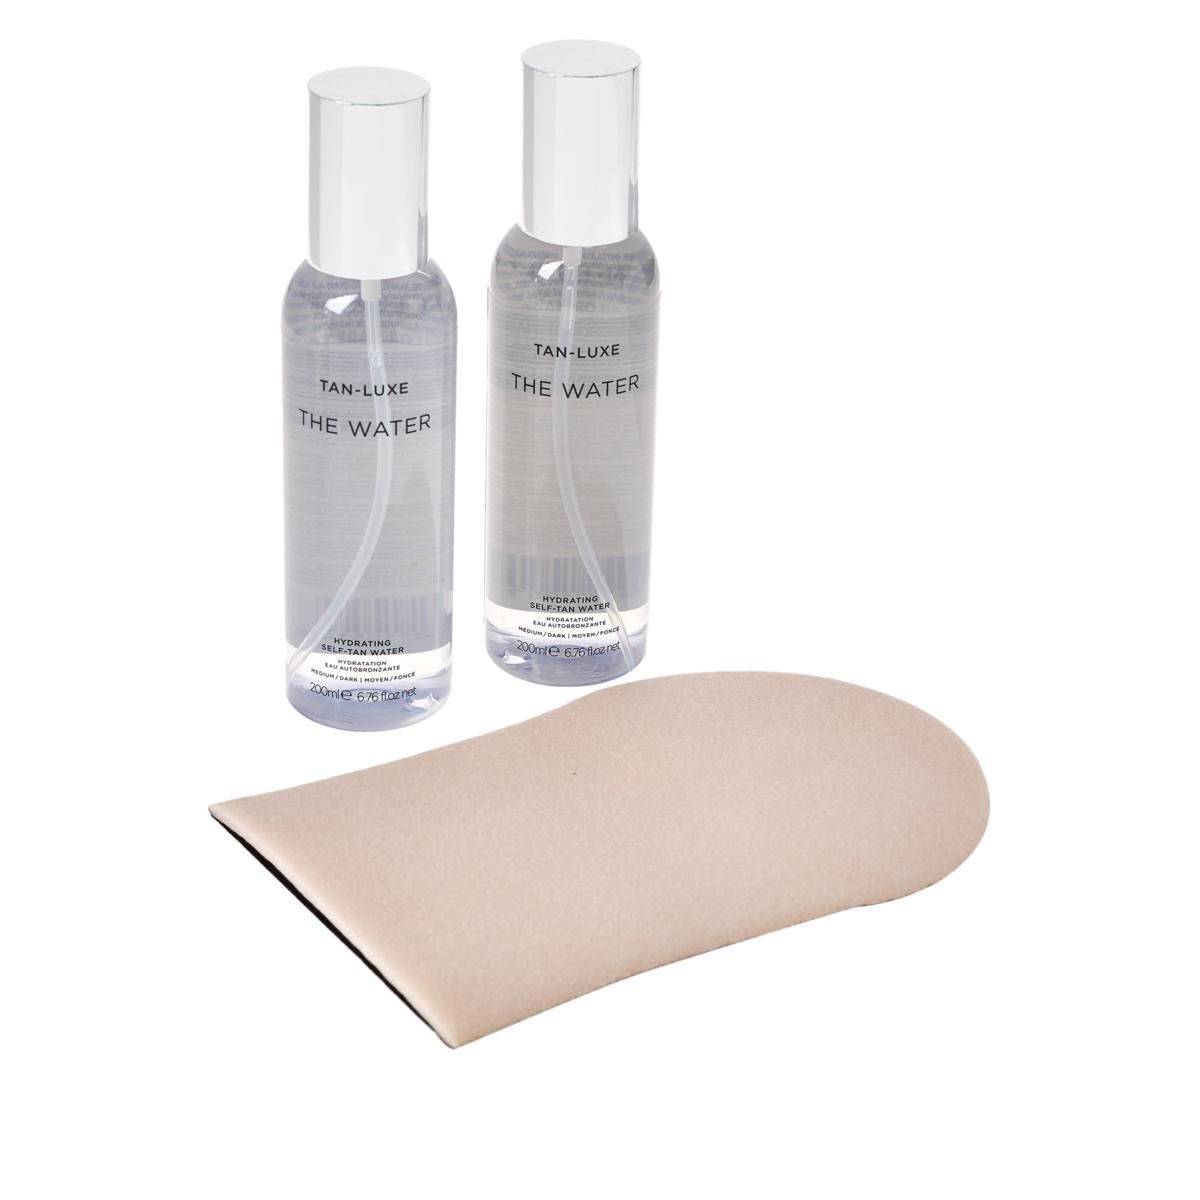 Tan-Luxe 2-pack The Water with Mitt - 10083095 | HSN | HSN